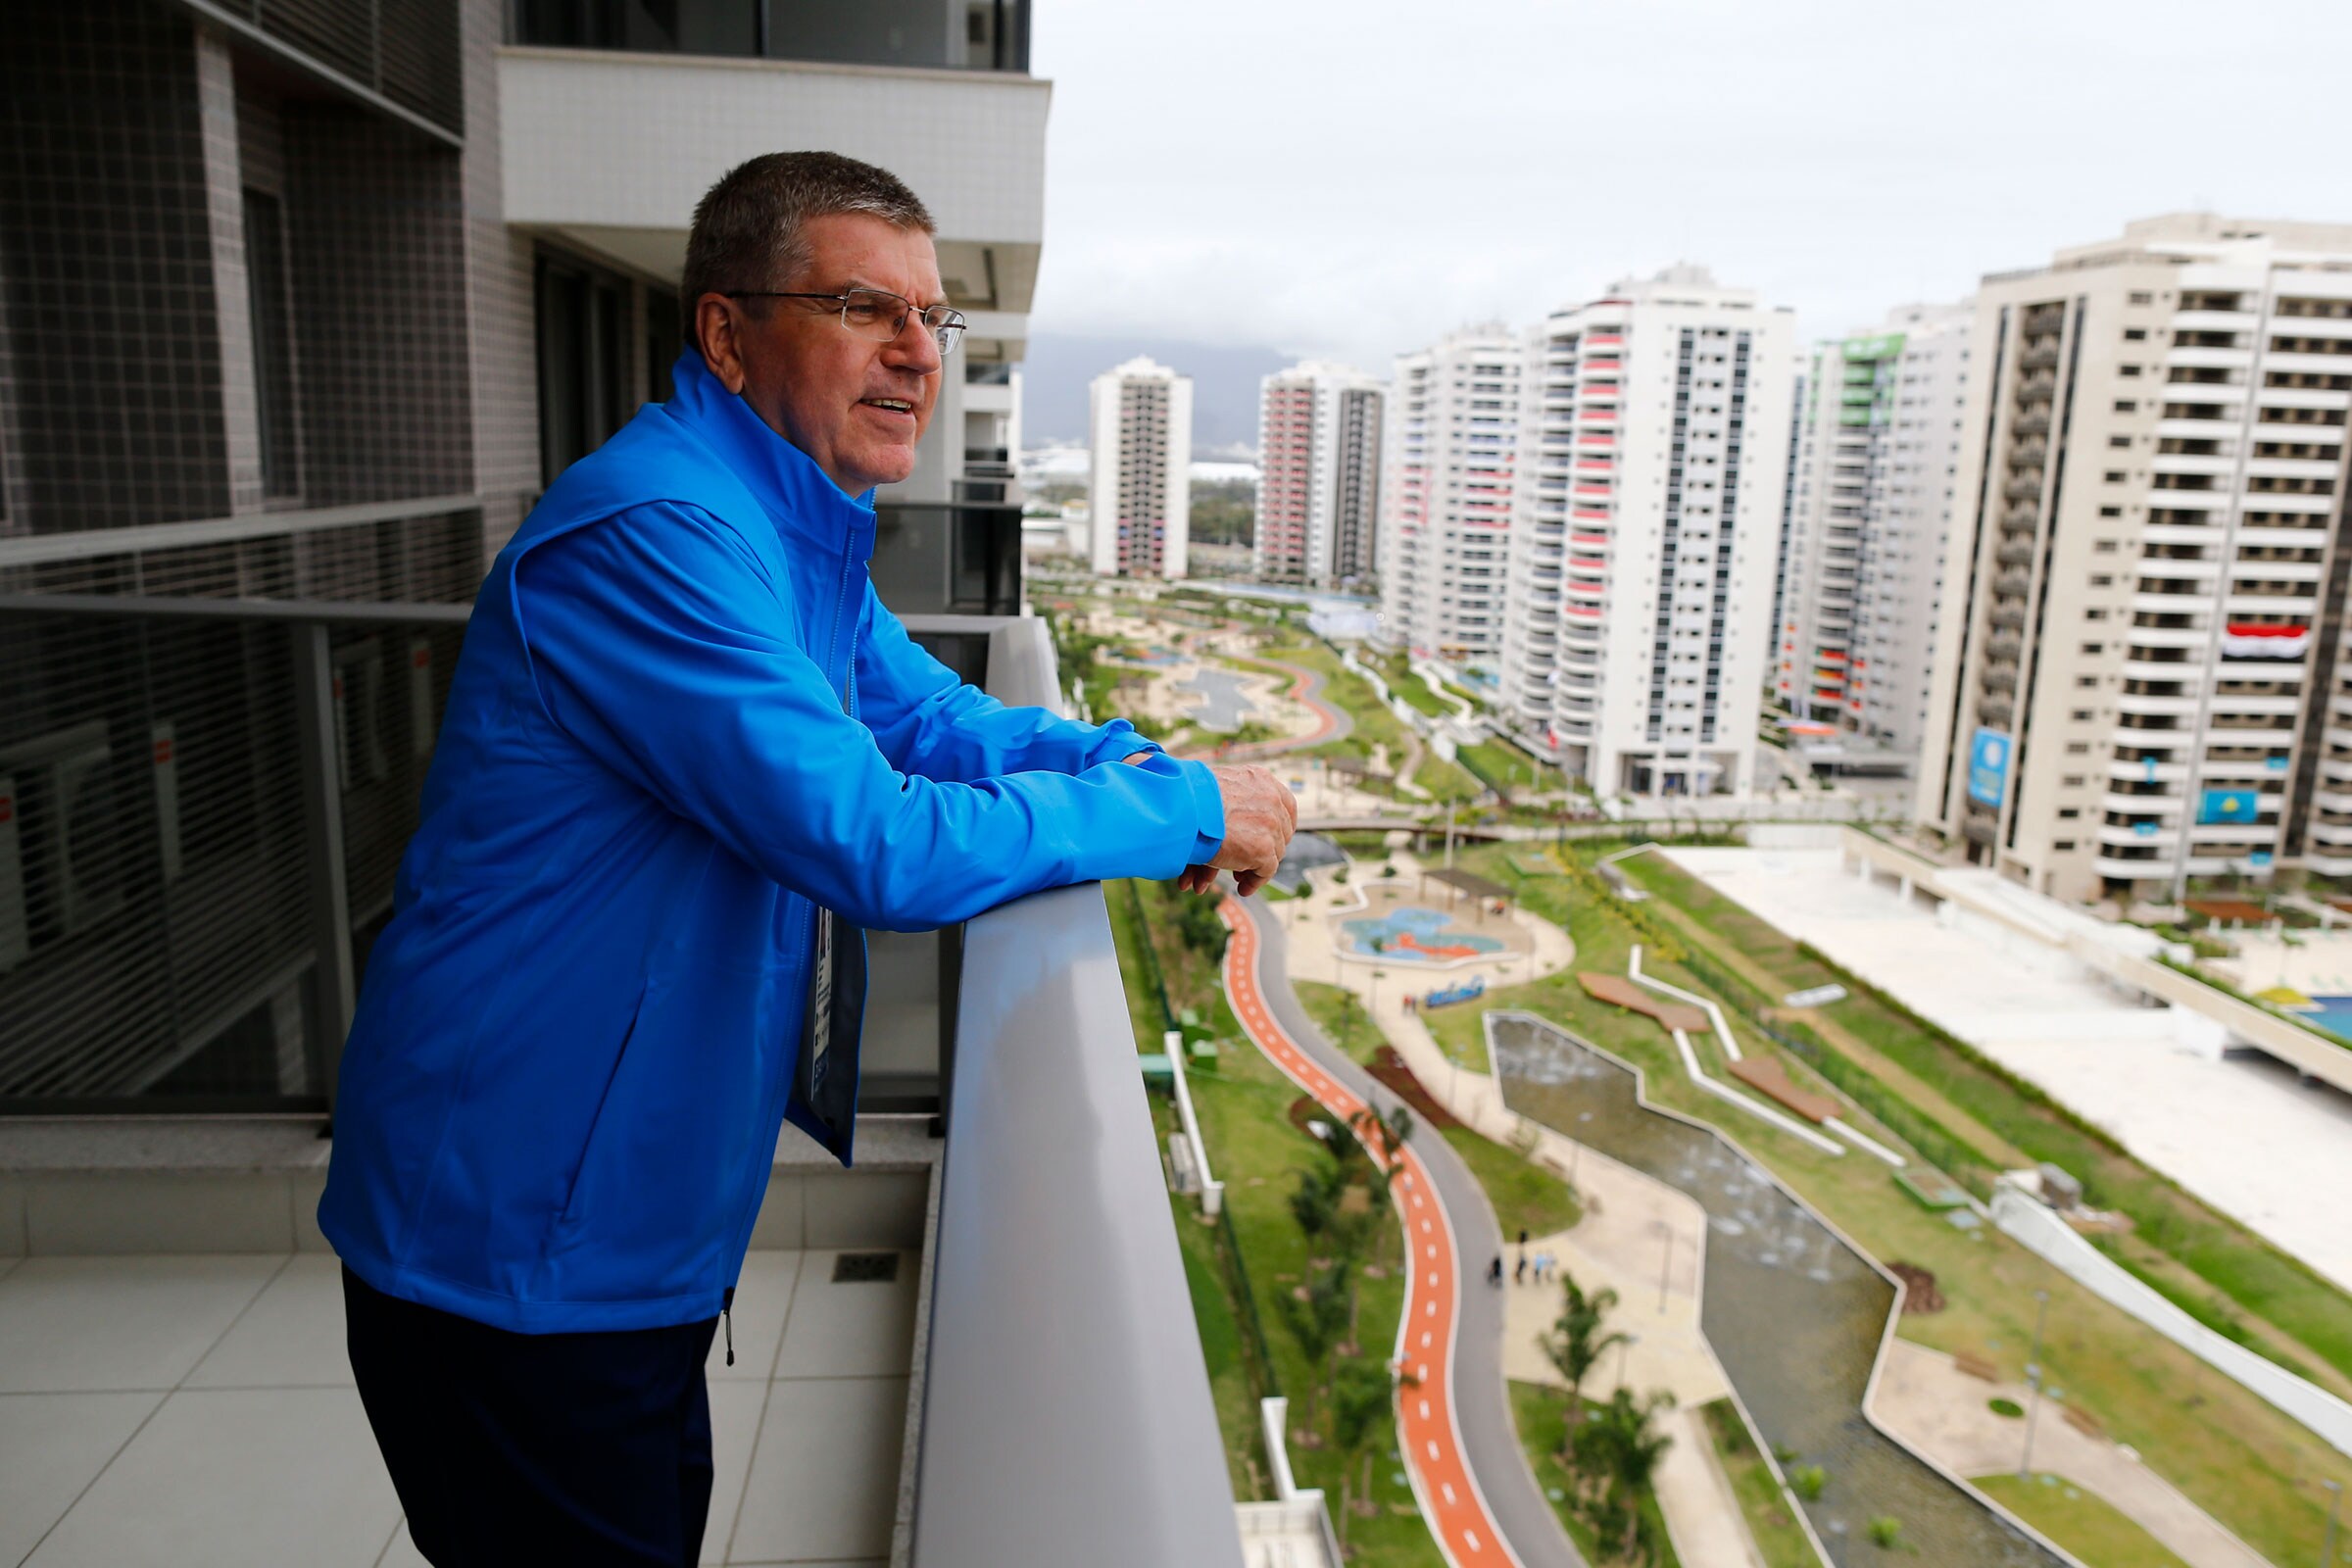 IOC President Thomas Bach at the Olympic Village of the Olympic Games Rio 2016